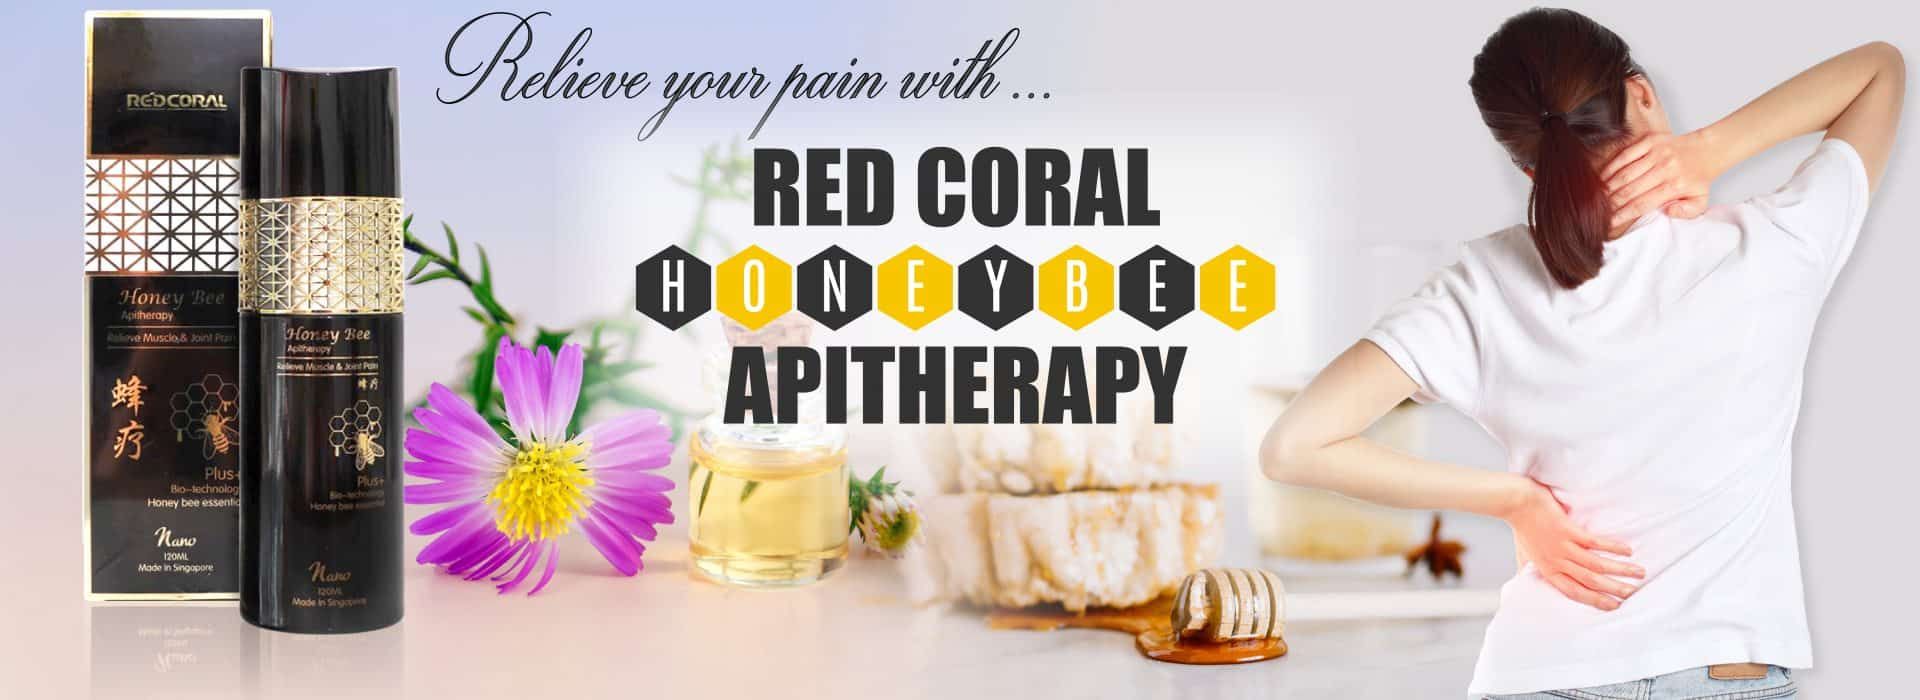 honeycity.com.sg - Red Coral Honeybee Apitherapy-Banner